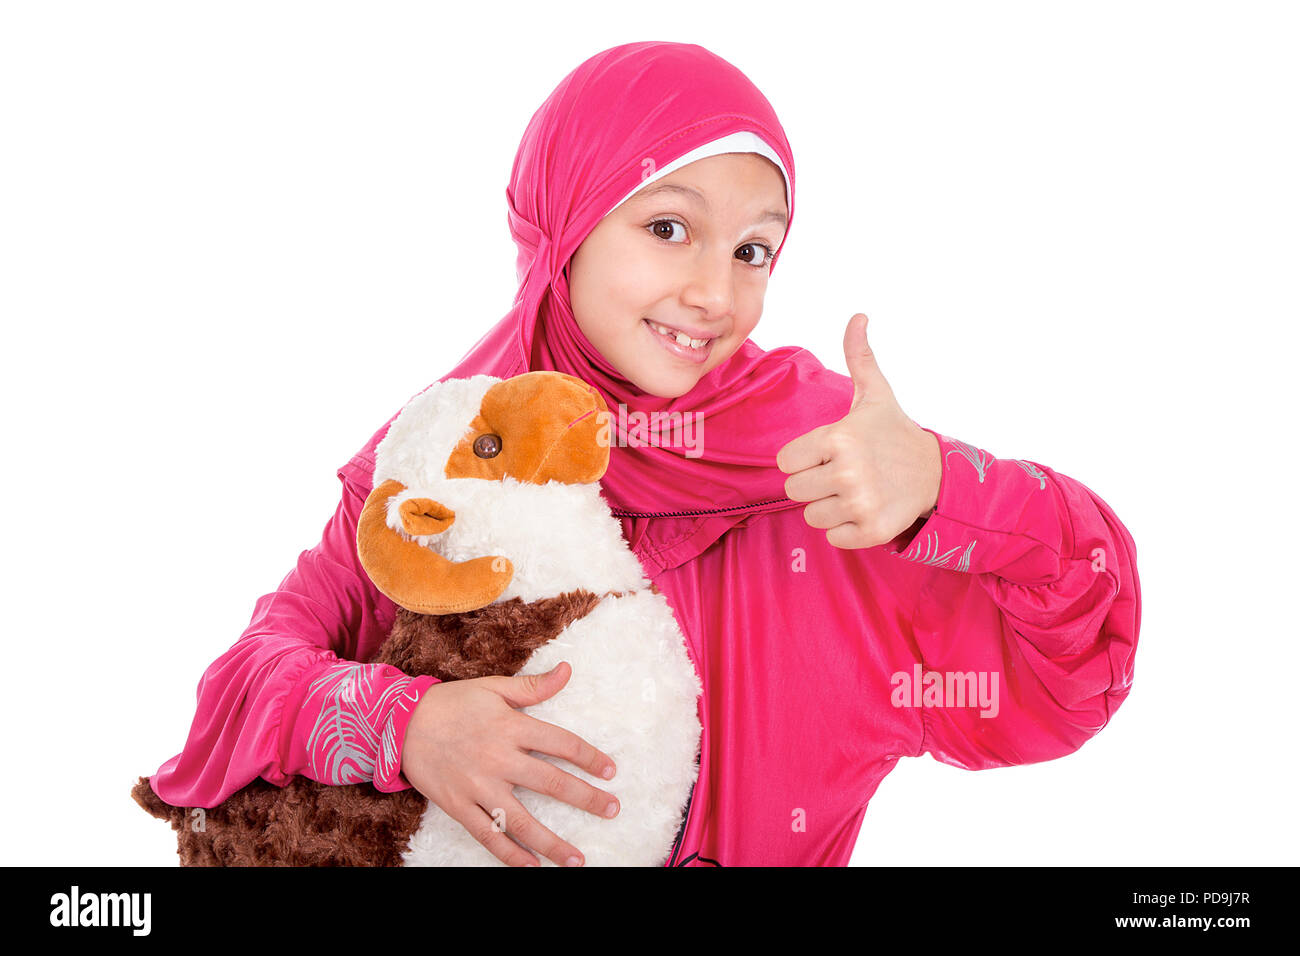 Happy little girl playing with her sheep toy - celebrating Eid ul Adha - Happy Sacrifice Feast Stock Photo